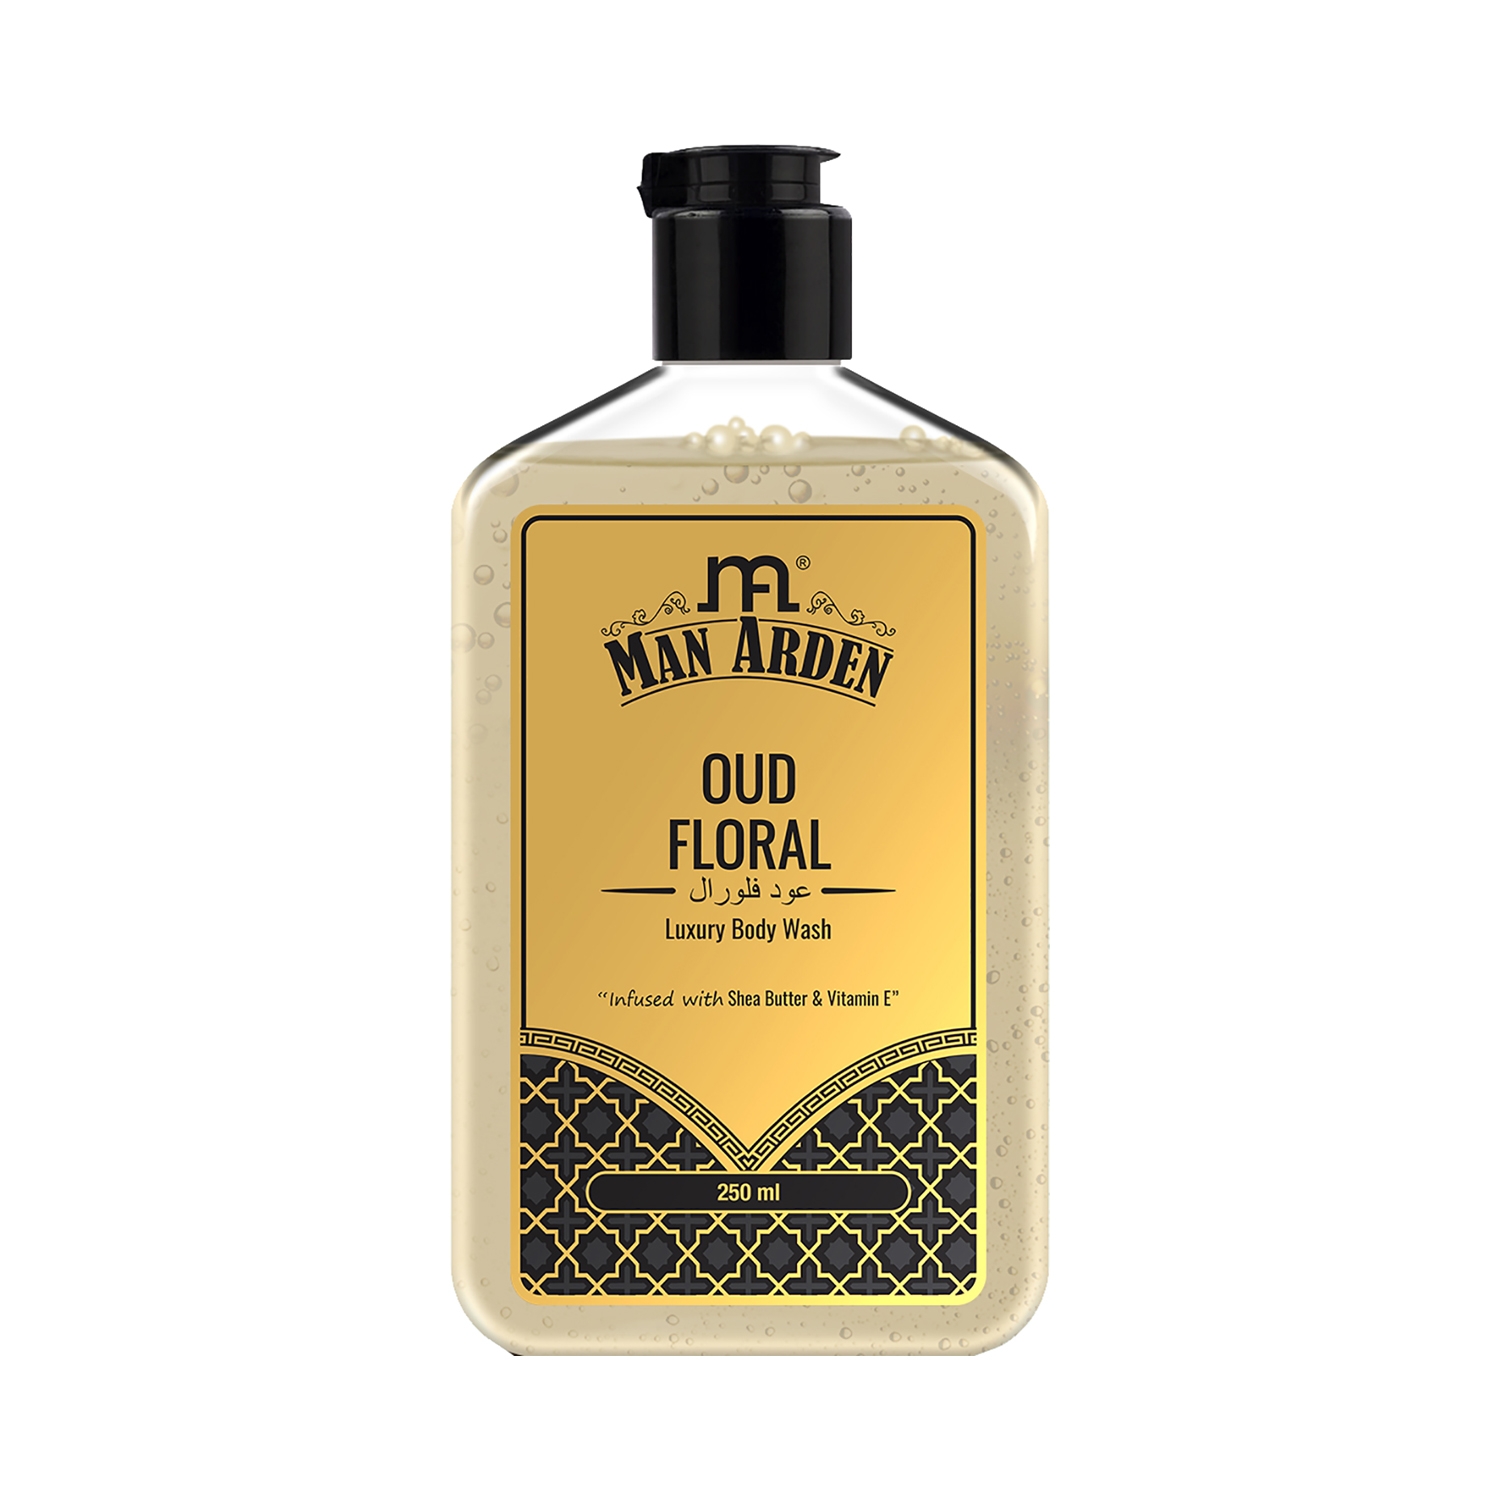 Man Arden | Man Arden Oud Floral Luxury Body Wash Infused With Shea Butter & Vitamin E (250ml)